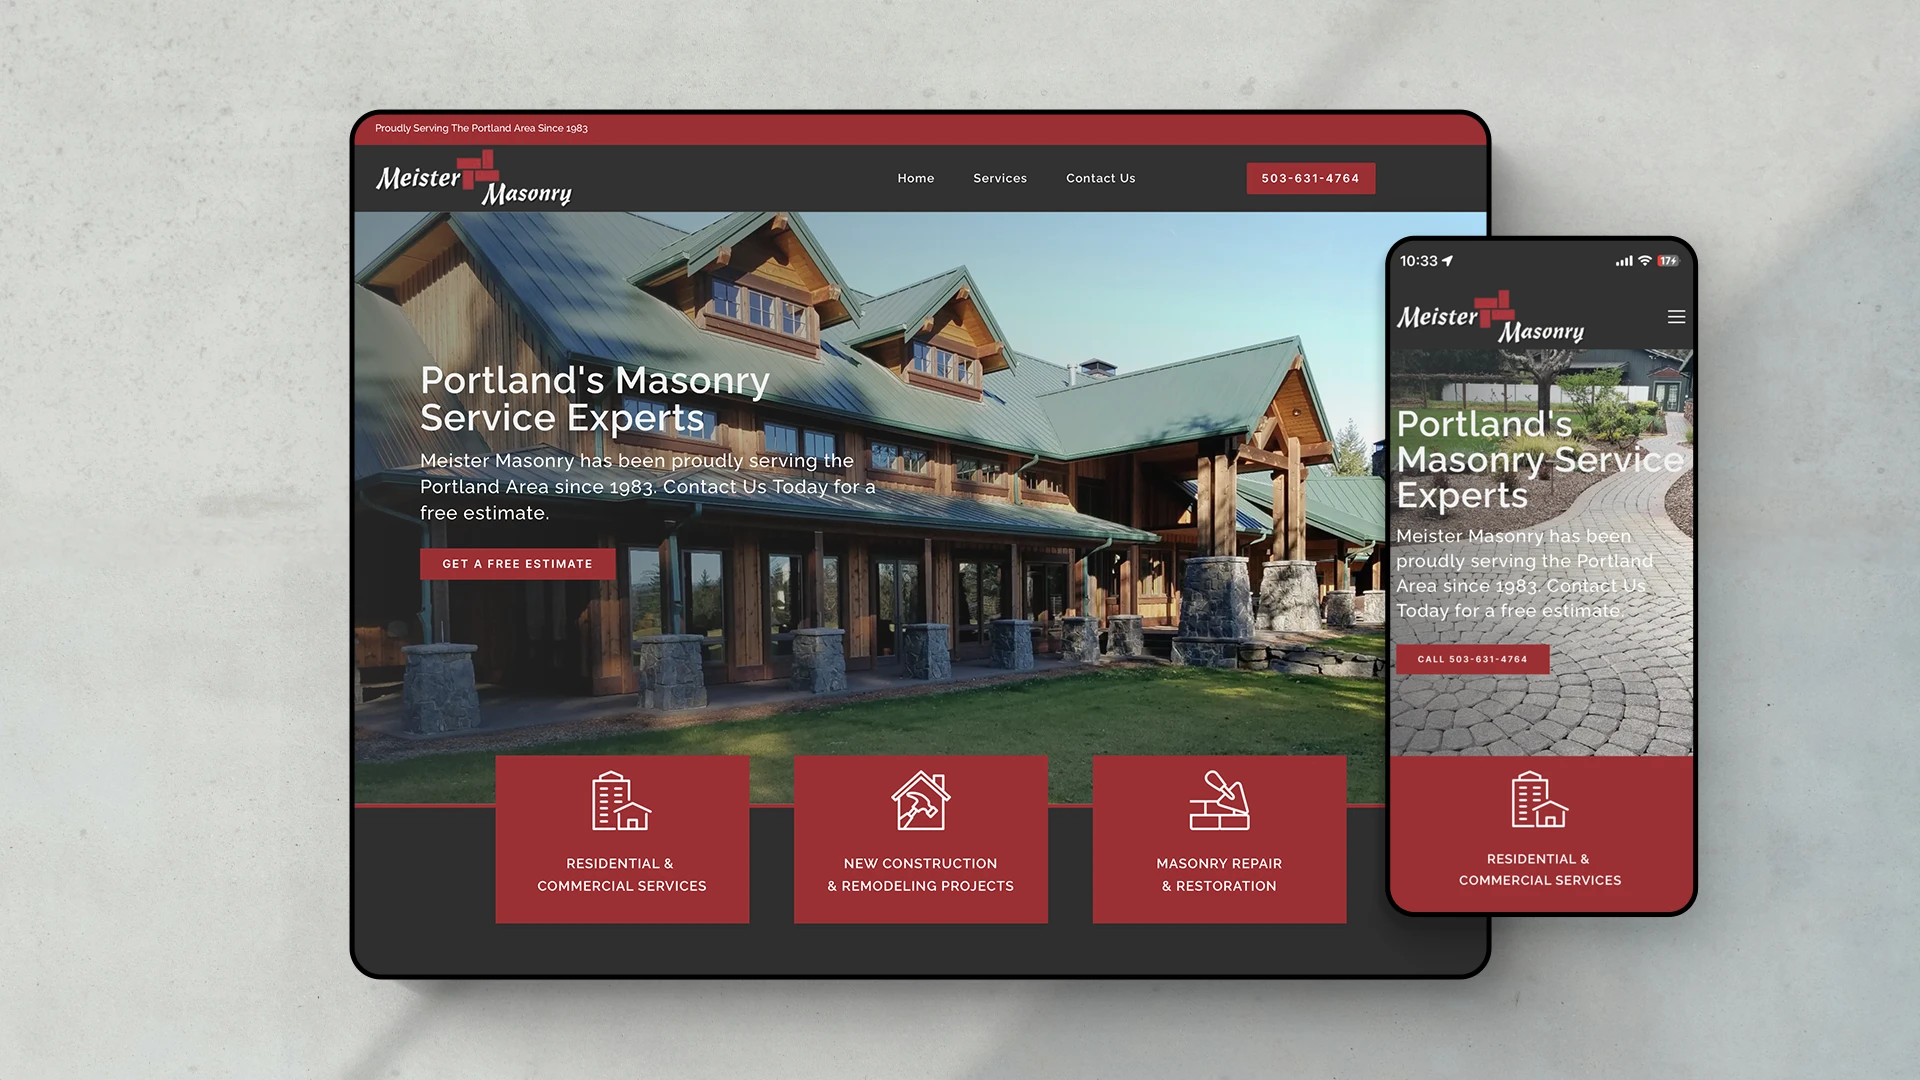 Meister Masonry homepage web design shown on mobile devices sitting on stone pavers